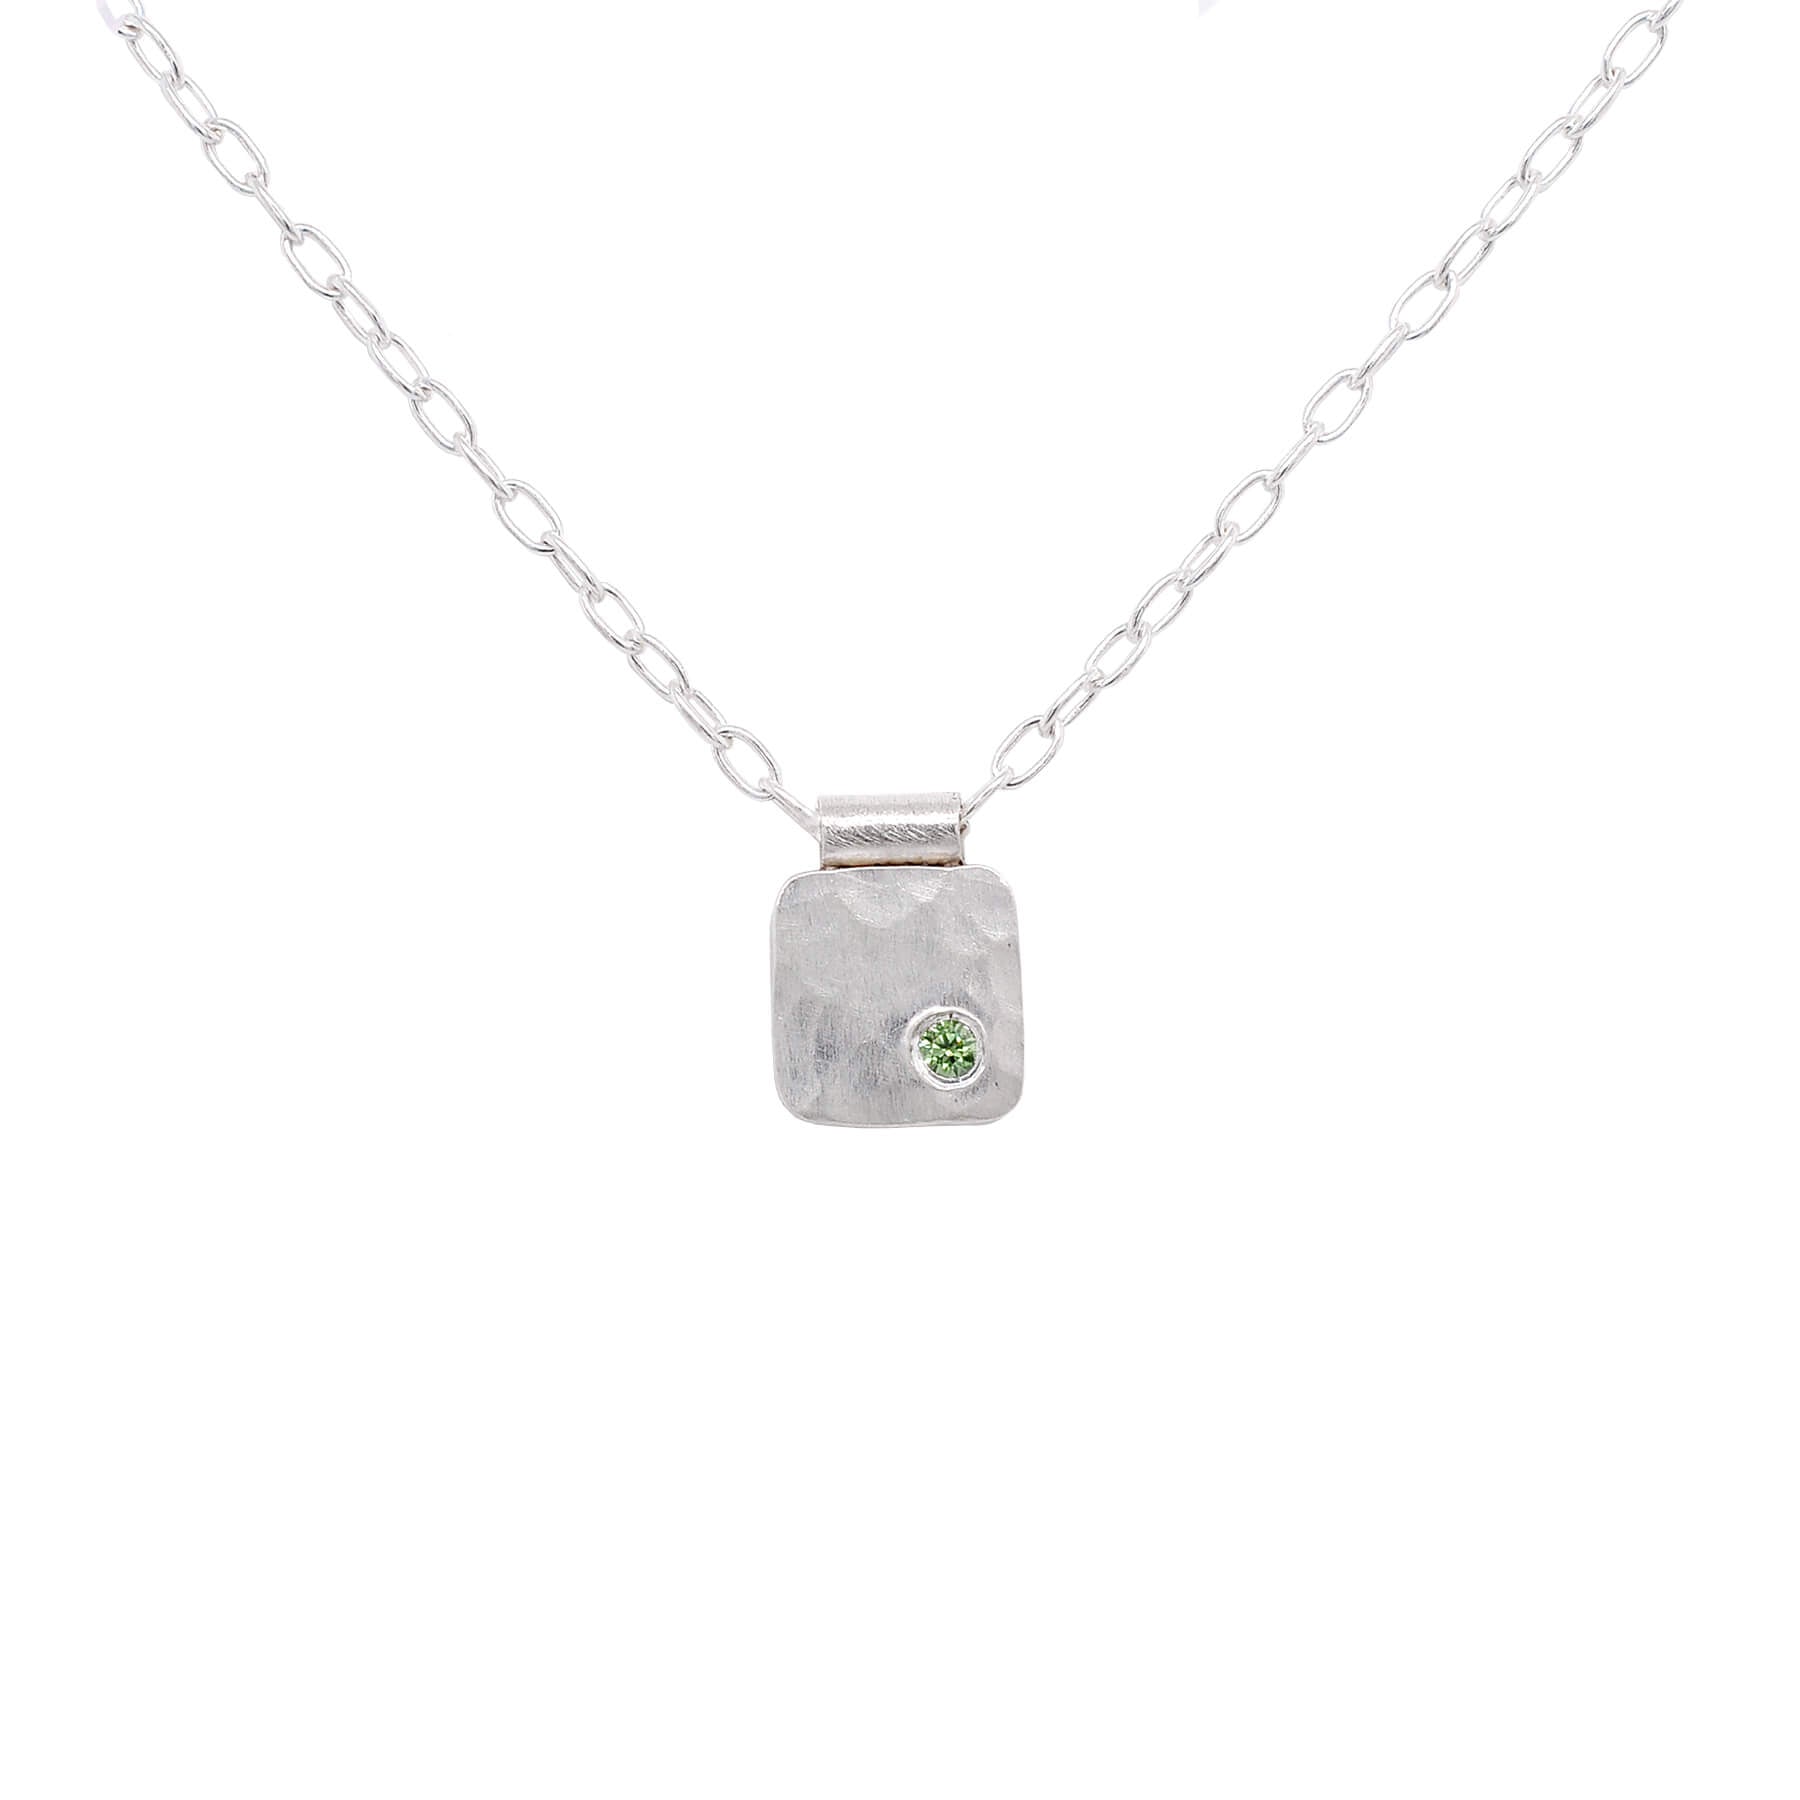 Hammered silver cell necklace with lime green diamond accent. Handmade by EC Design Jewelry in Minneapolis, MN.